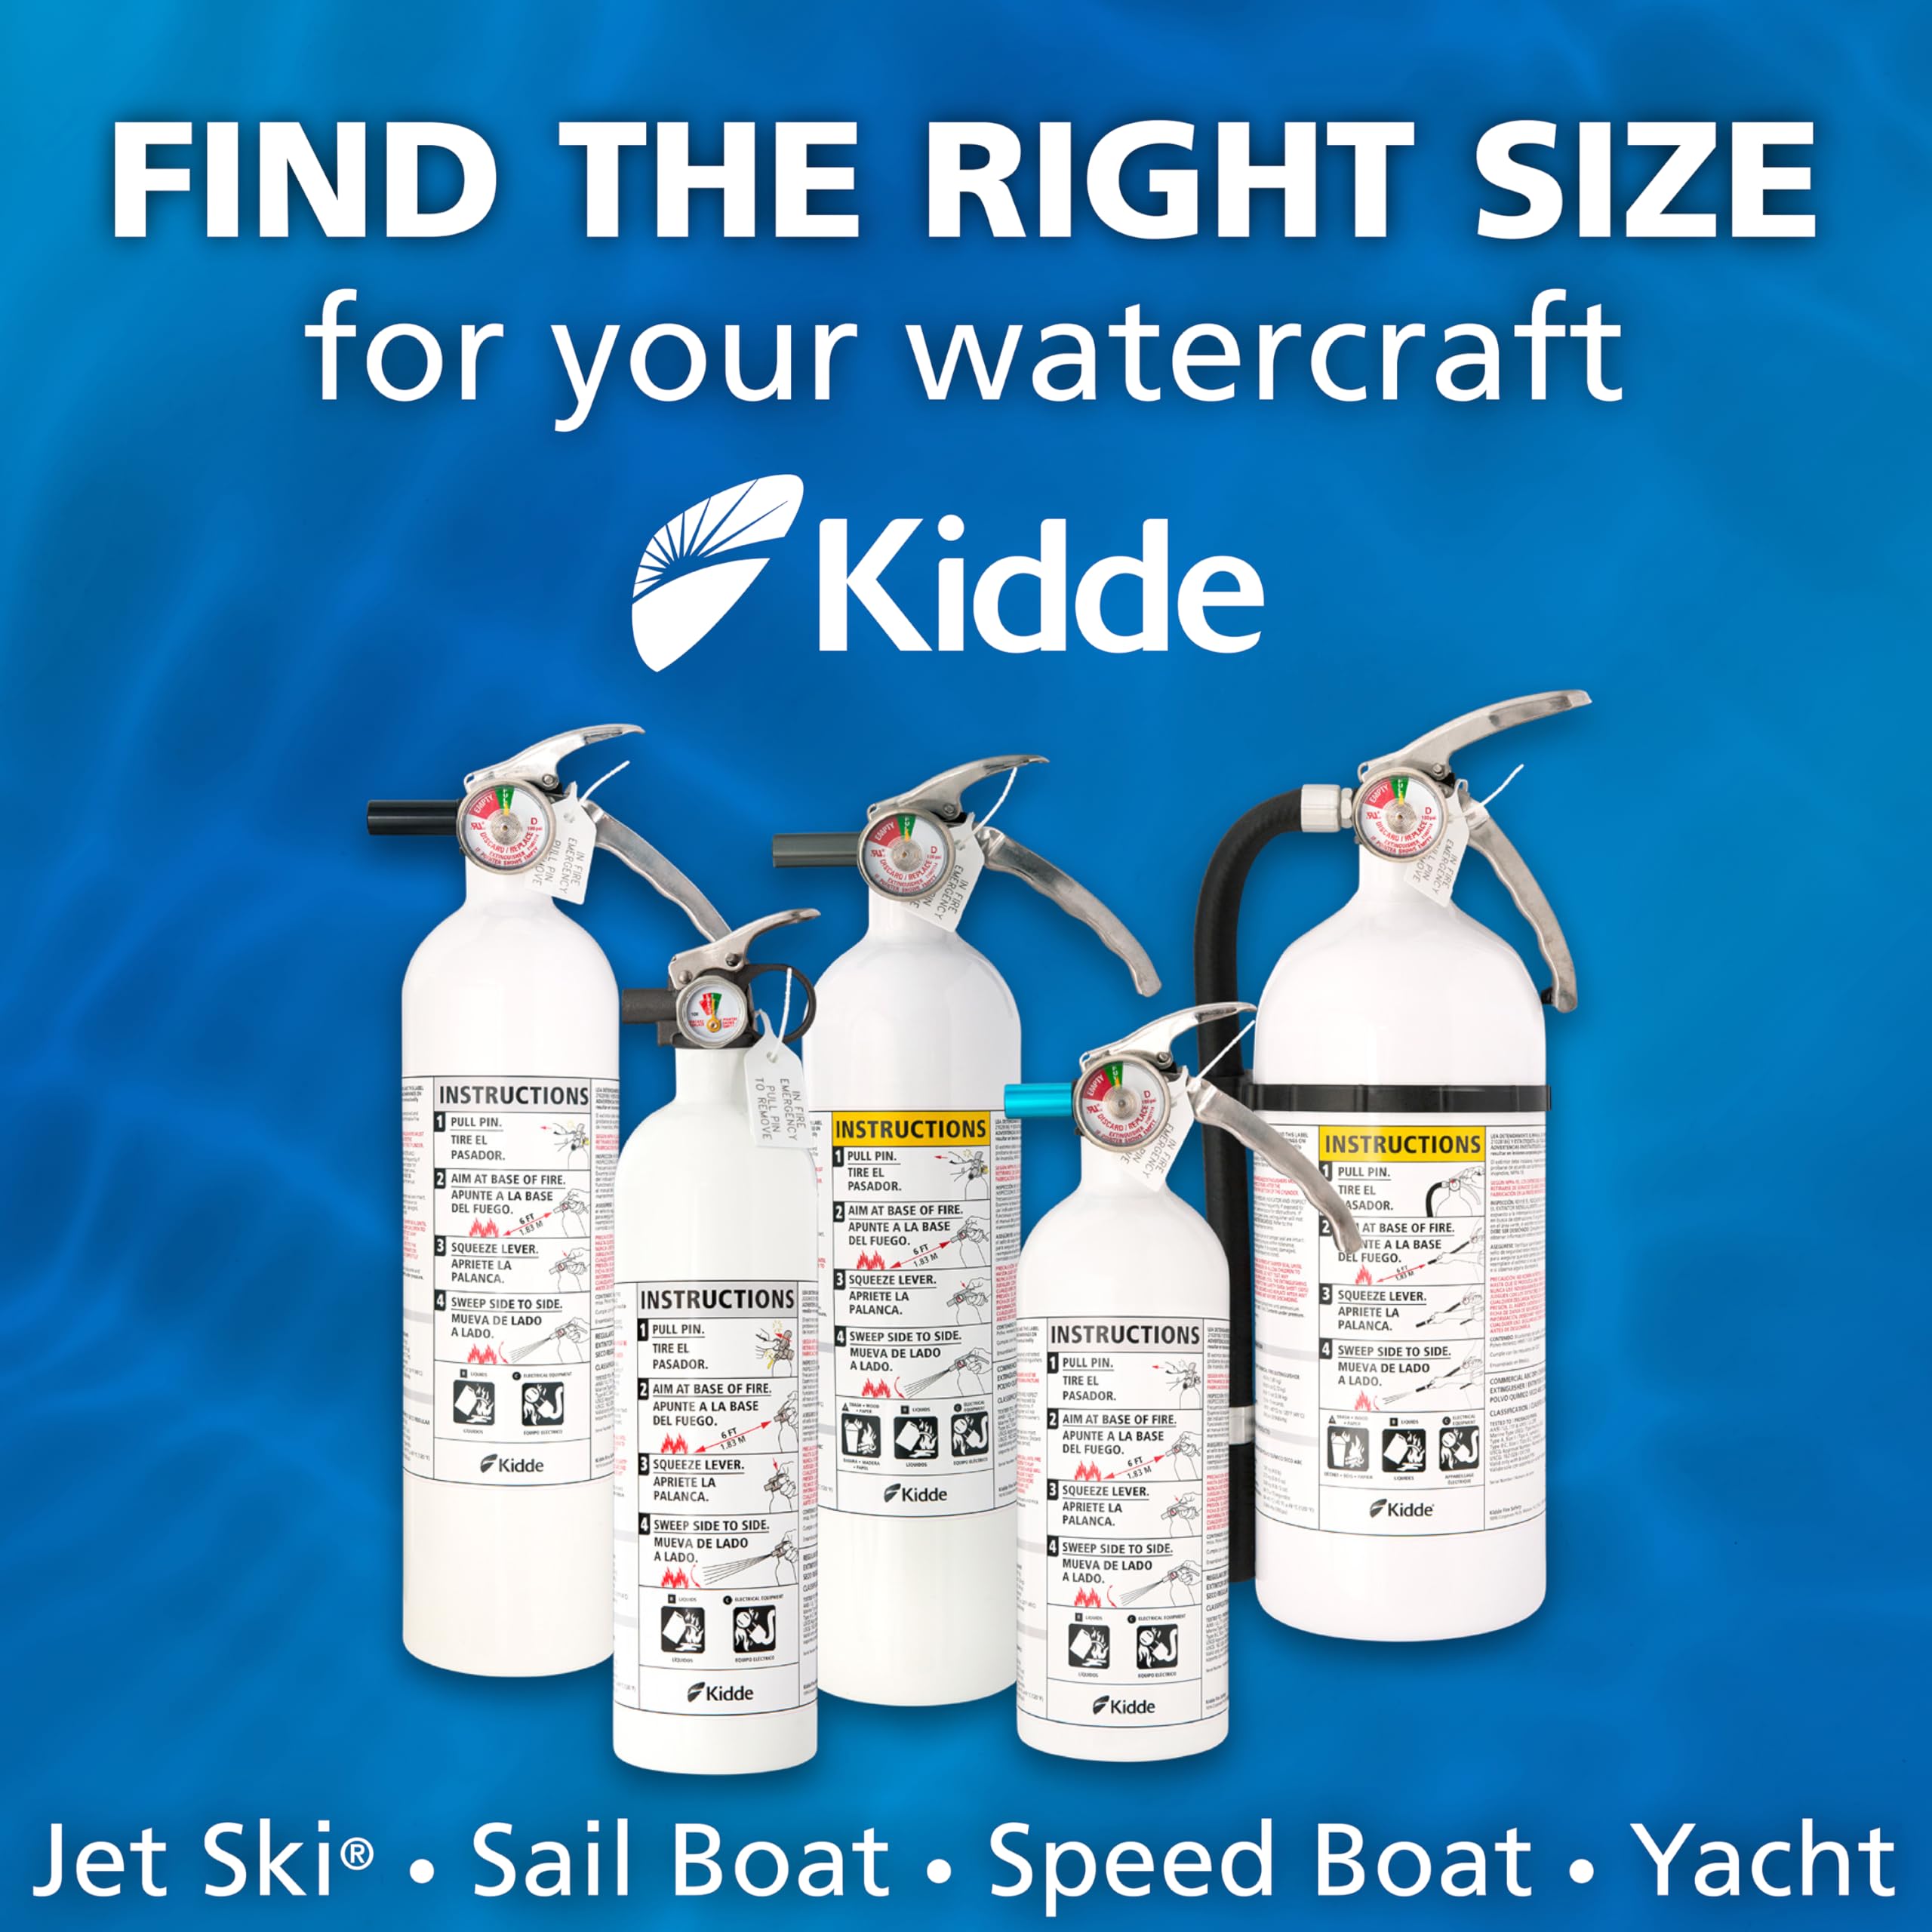 Kidde Mariner PWC Marine Fire Extinguisher for Boats, 5-B:C, 3.3 Lbs., Coast Guard Approved, Mounting Bracket (Included), White